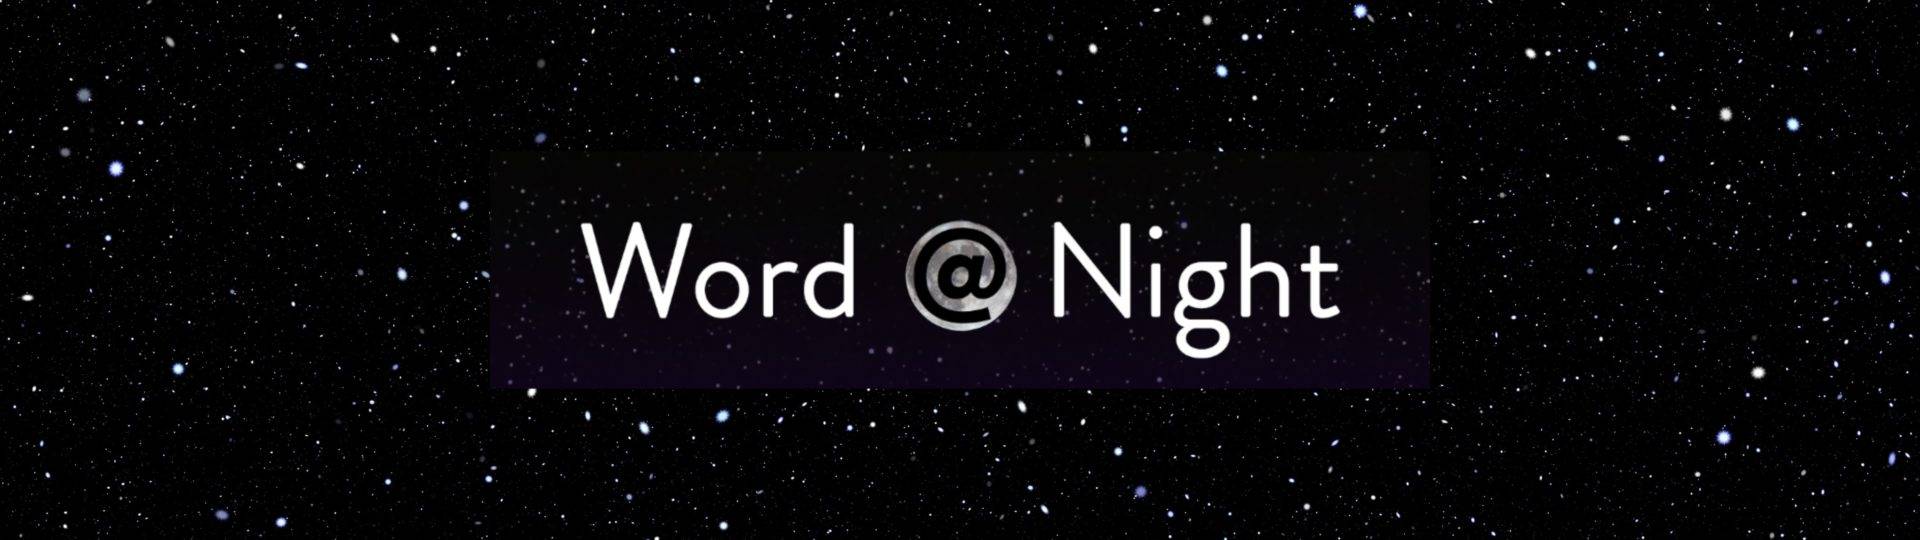 word at night instagram square 3840 × 1080